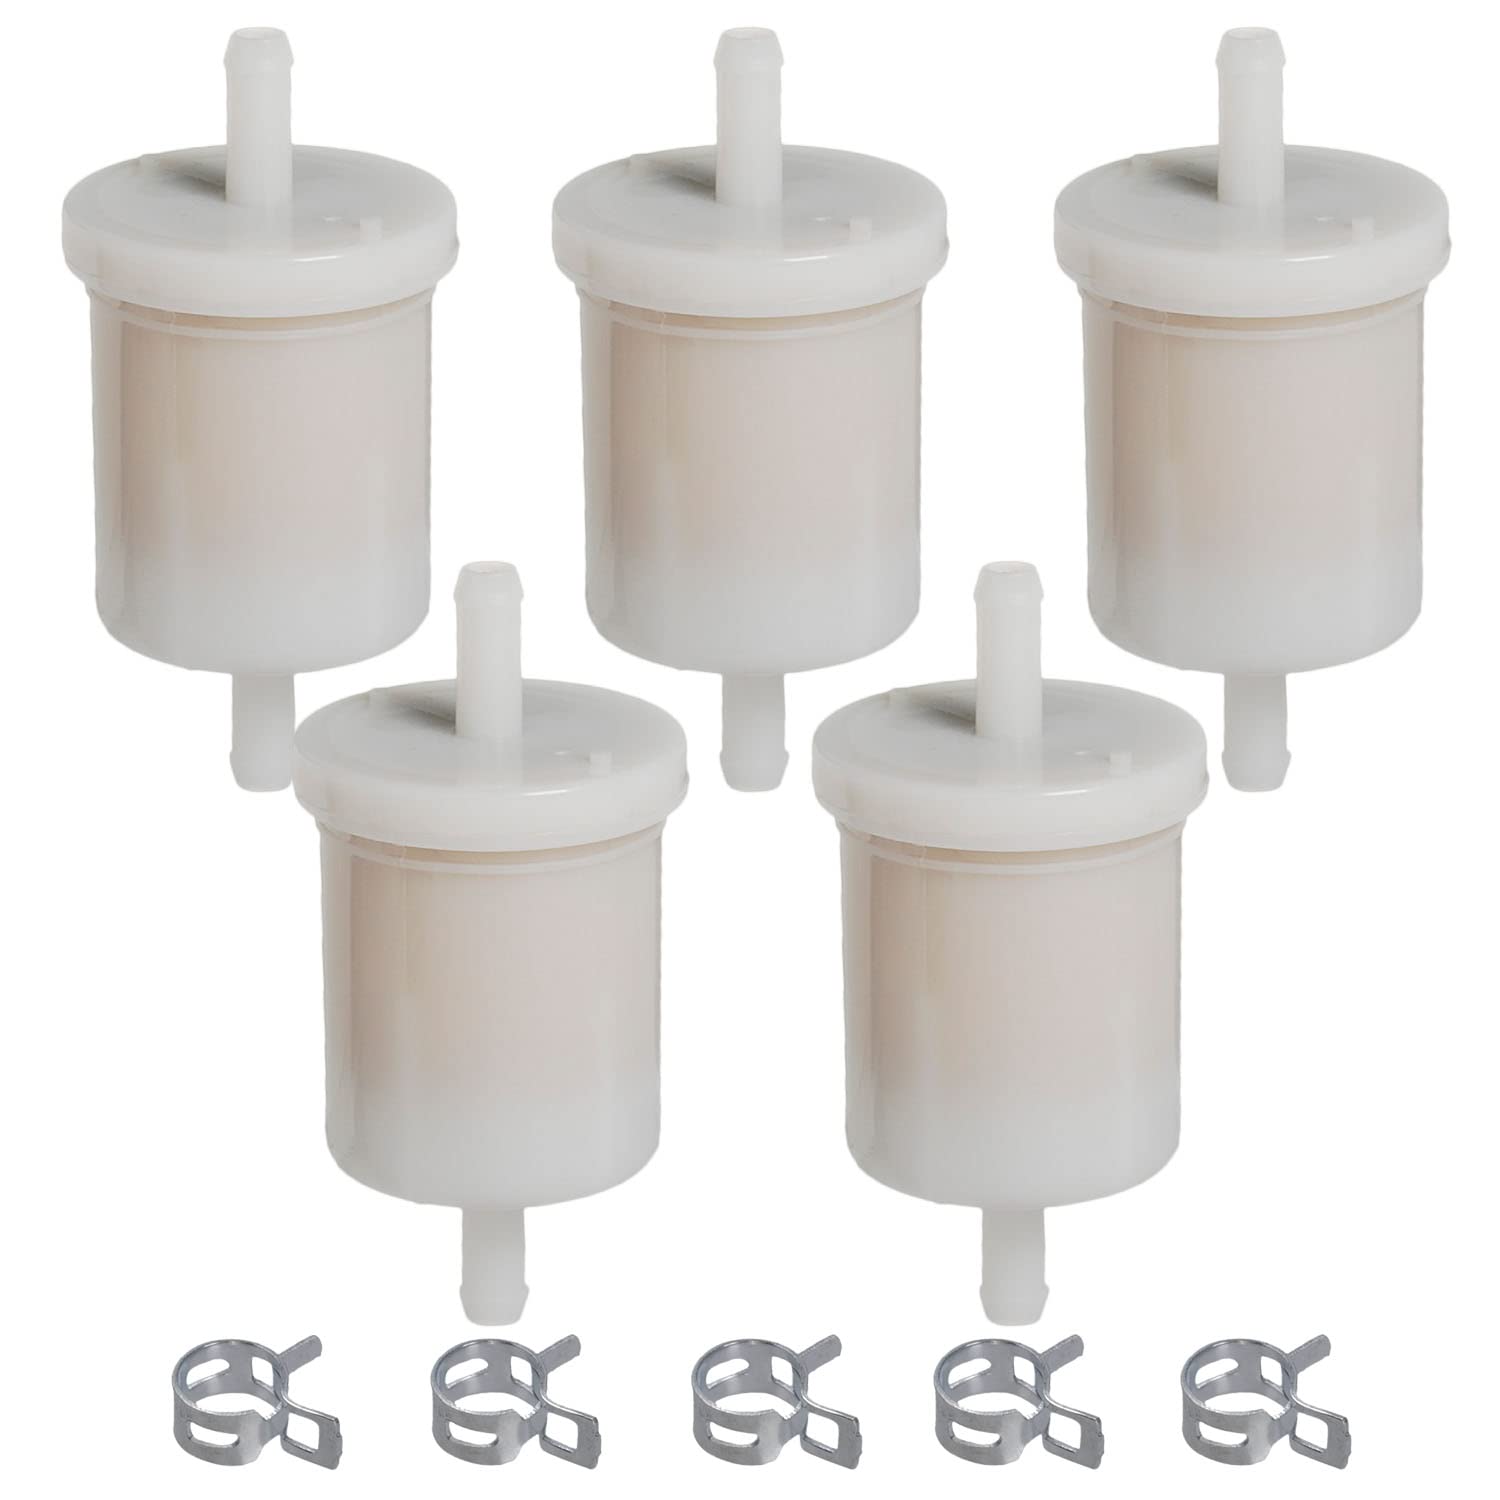 HIFROM (Pack of 5) Fuel Filter Clamps Compatible with Kubota 12581-43012 12581-43010 BX22D BX23D BX25 BX1870 BX1860 BX1800D BX1500D BX2200D BX2370 GR2100 GF1800 von hifrom